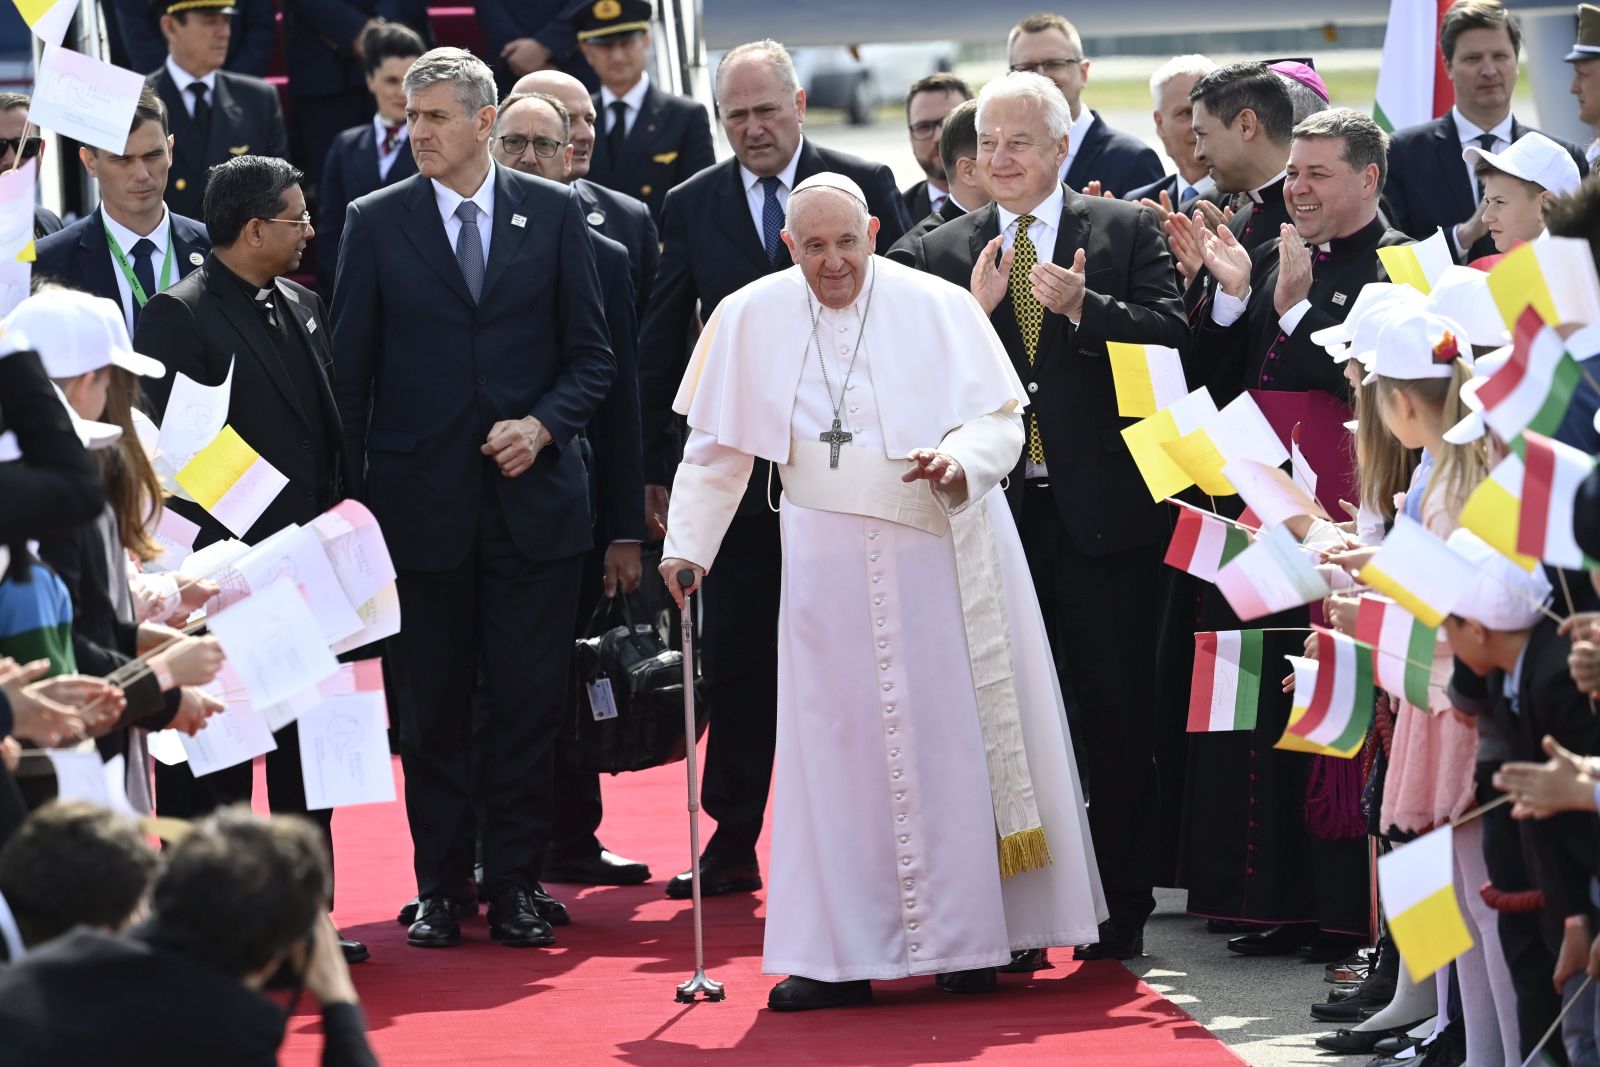 epa10596011 Pope Francis greets faithfuls as he arrives for his three-day Apostolic visit to Hungary, at Liszt Ferenc International Airport in Budapest, Hungary, 28 April 2023.  EPA/TAMAS KOVACS HUNGARY OUT